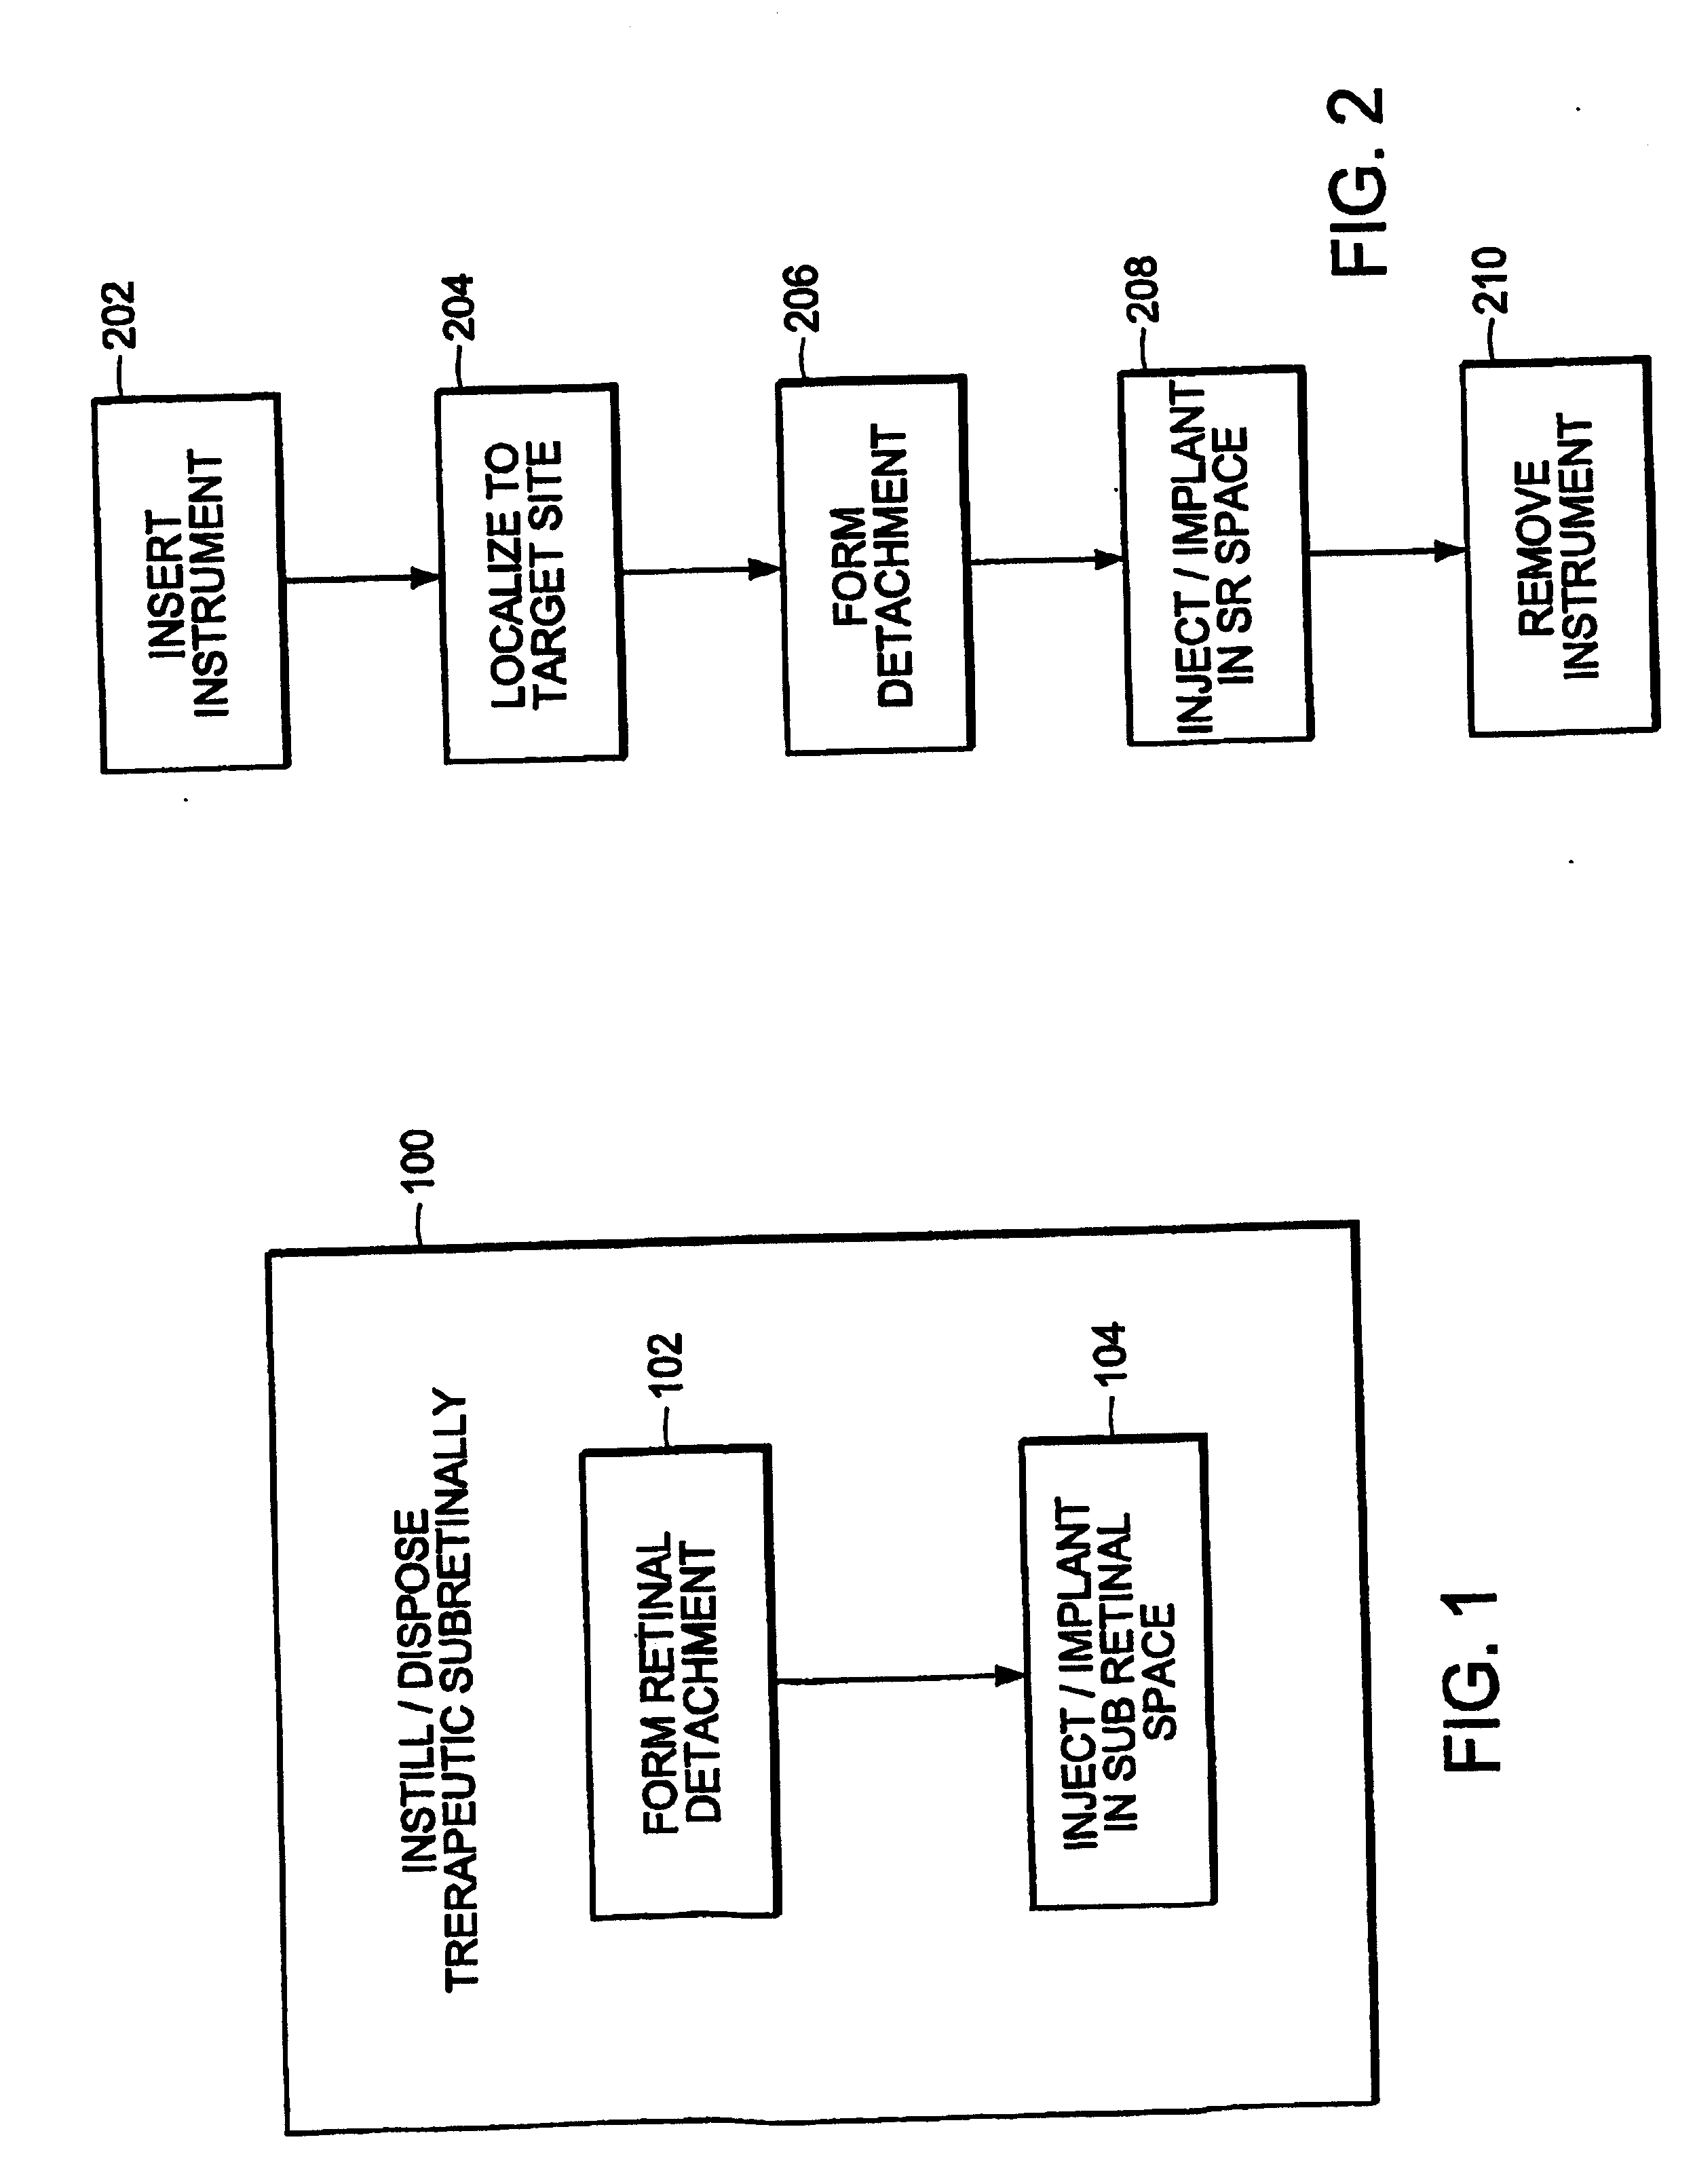 Method for subretinal administration of therapeutics including steroids; method for localizing pharmacodynamic action at the choroid of the retina; and related methods for treatment and/or prevention of retinal diseases